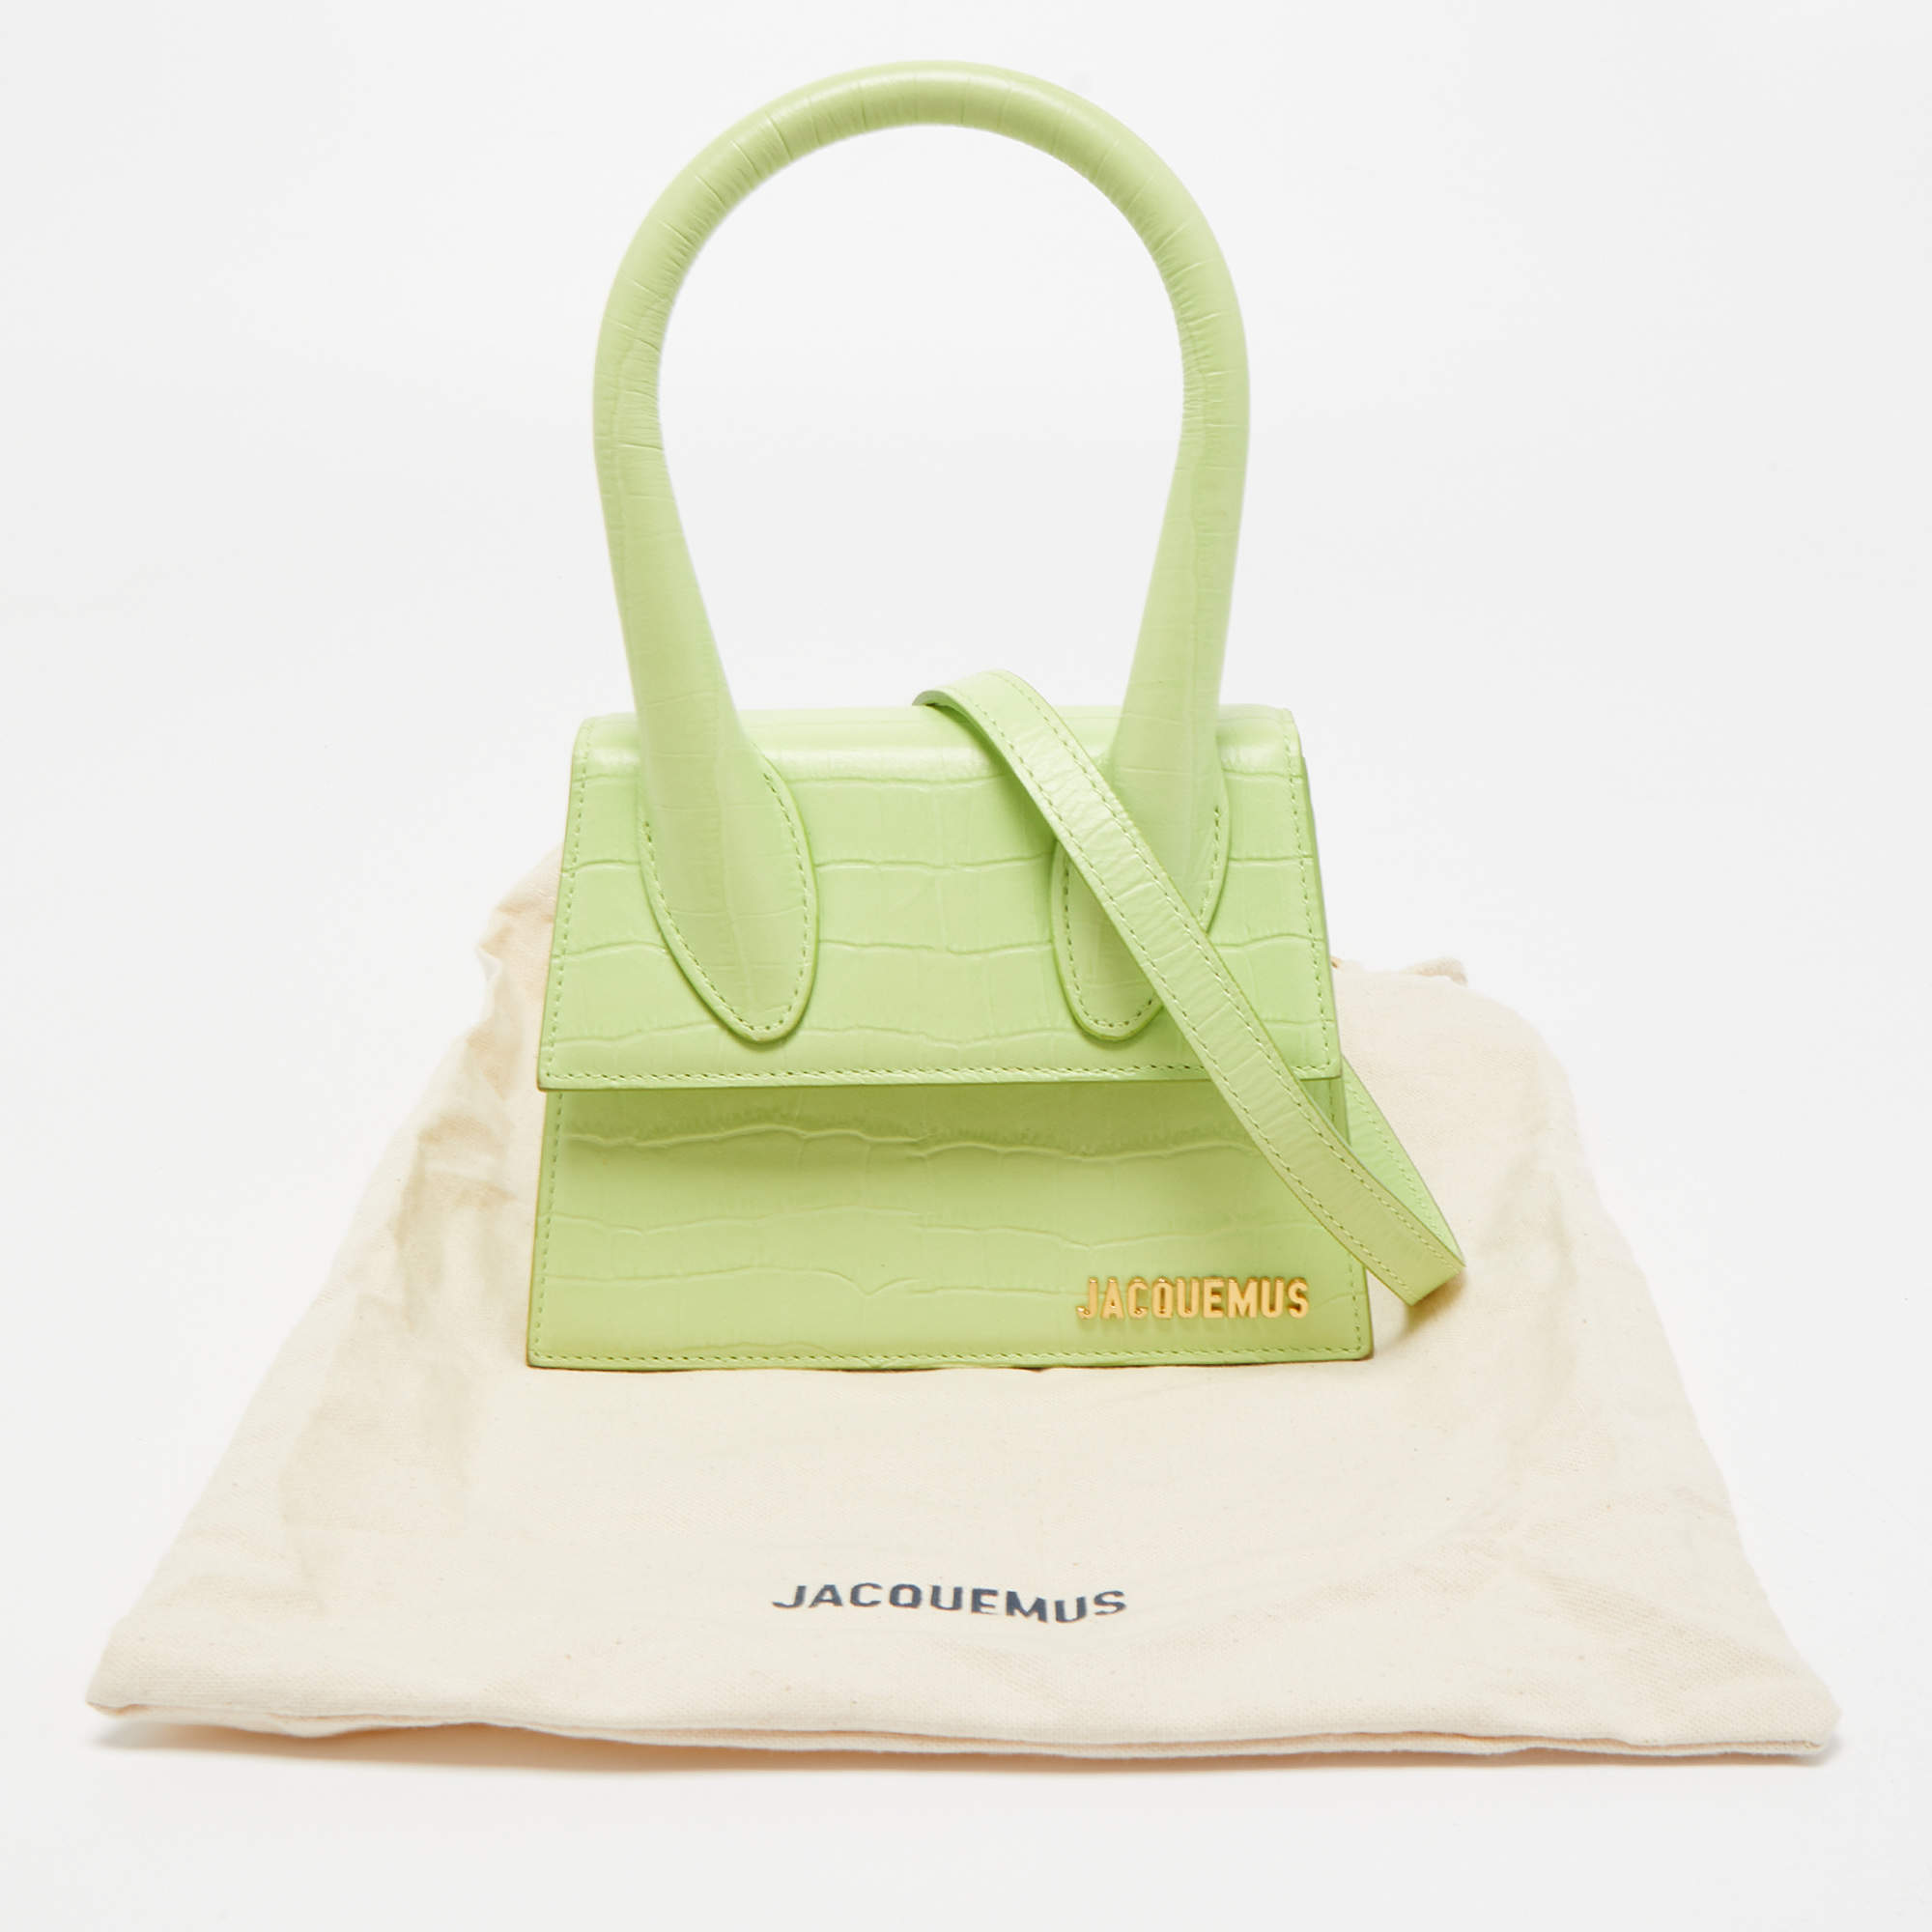 Le chiquito noeud leather handbag Jacquemus Green in Leather - 33576707